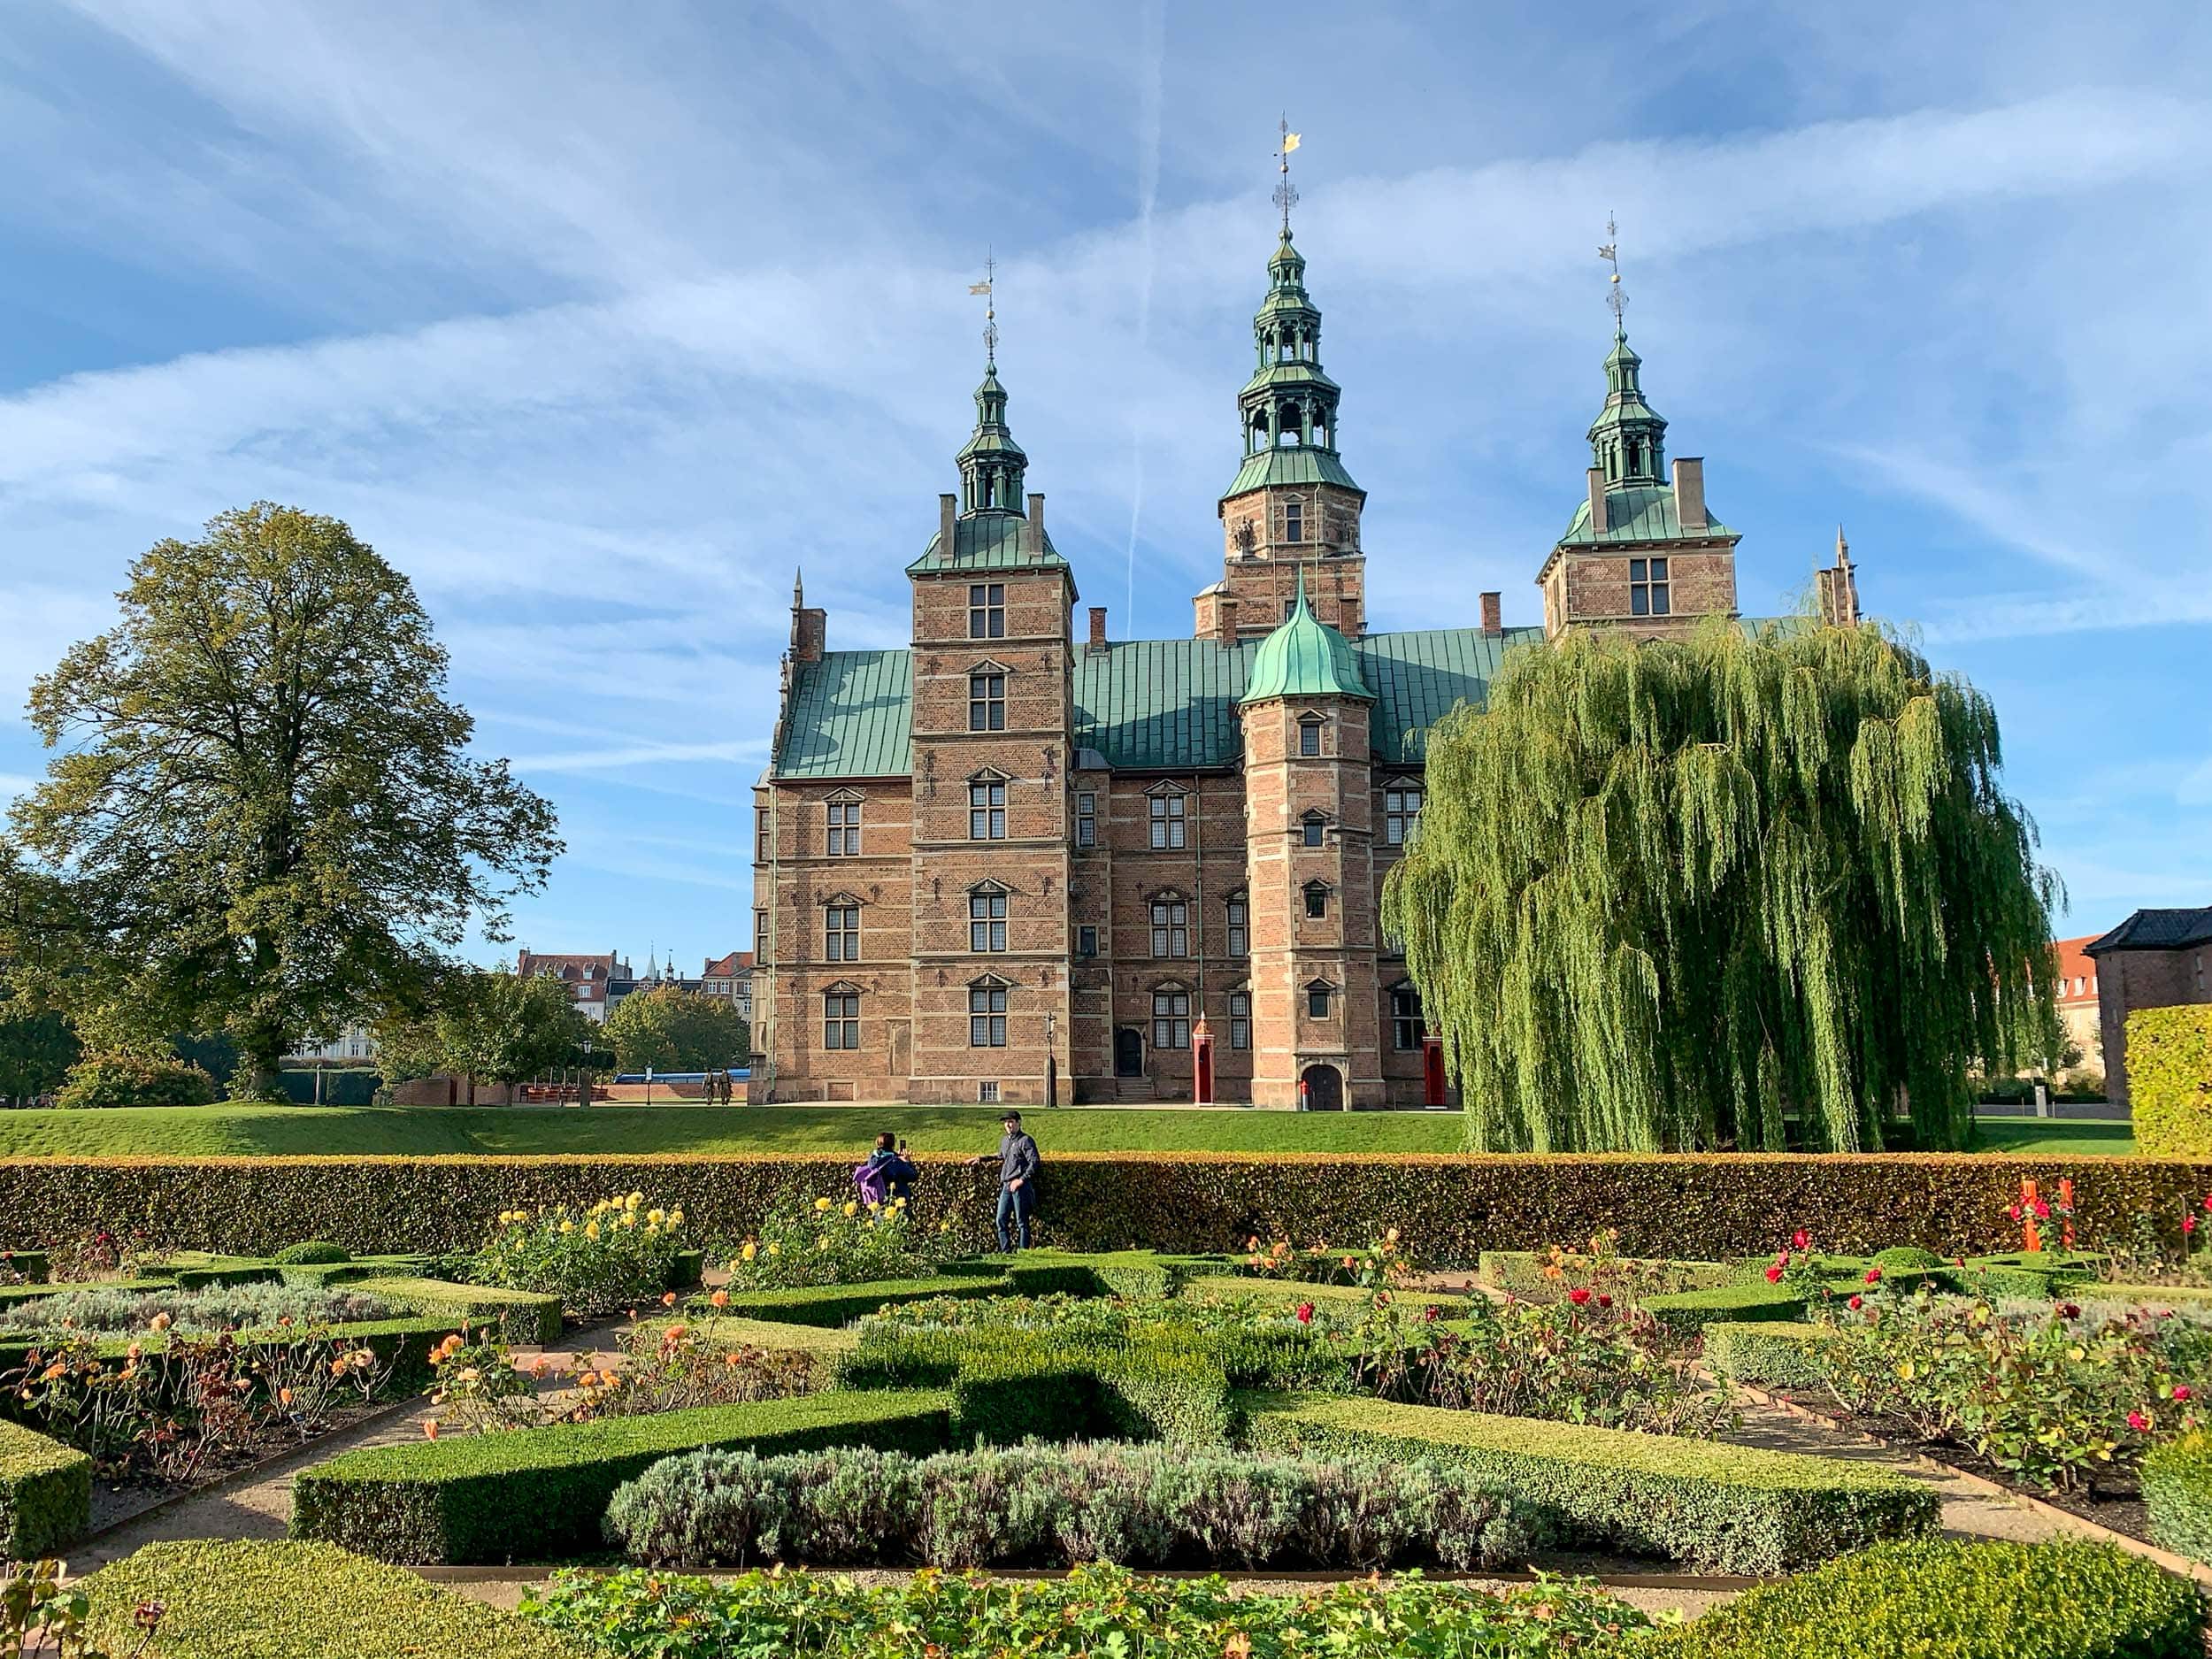 Don't miss the stunning Rosenborg Castle, one of the coolest places to visit in Copenhagen